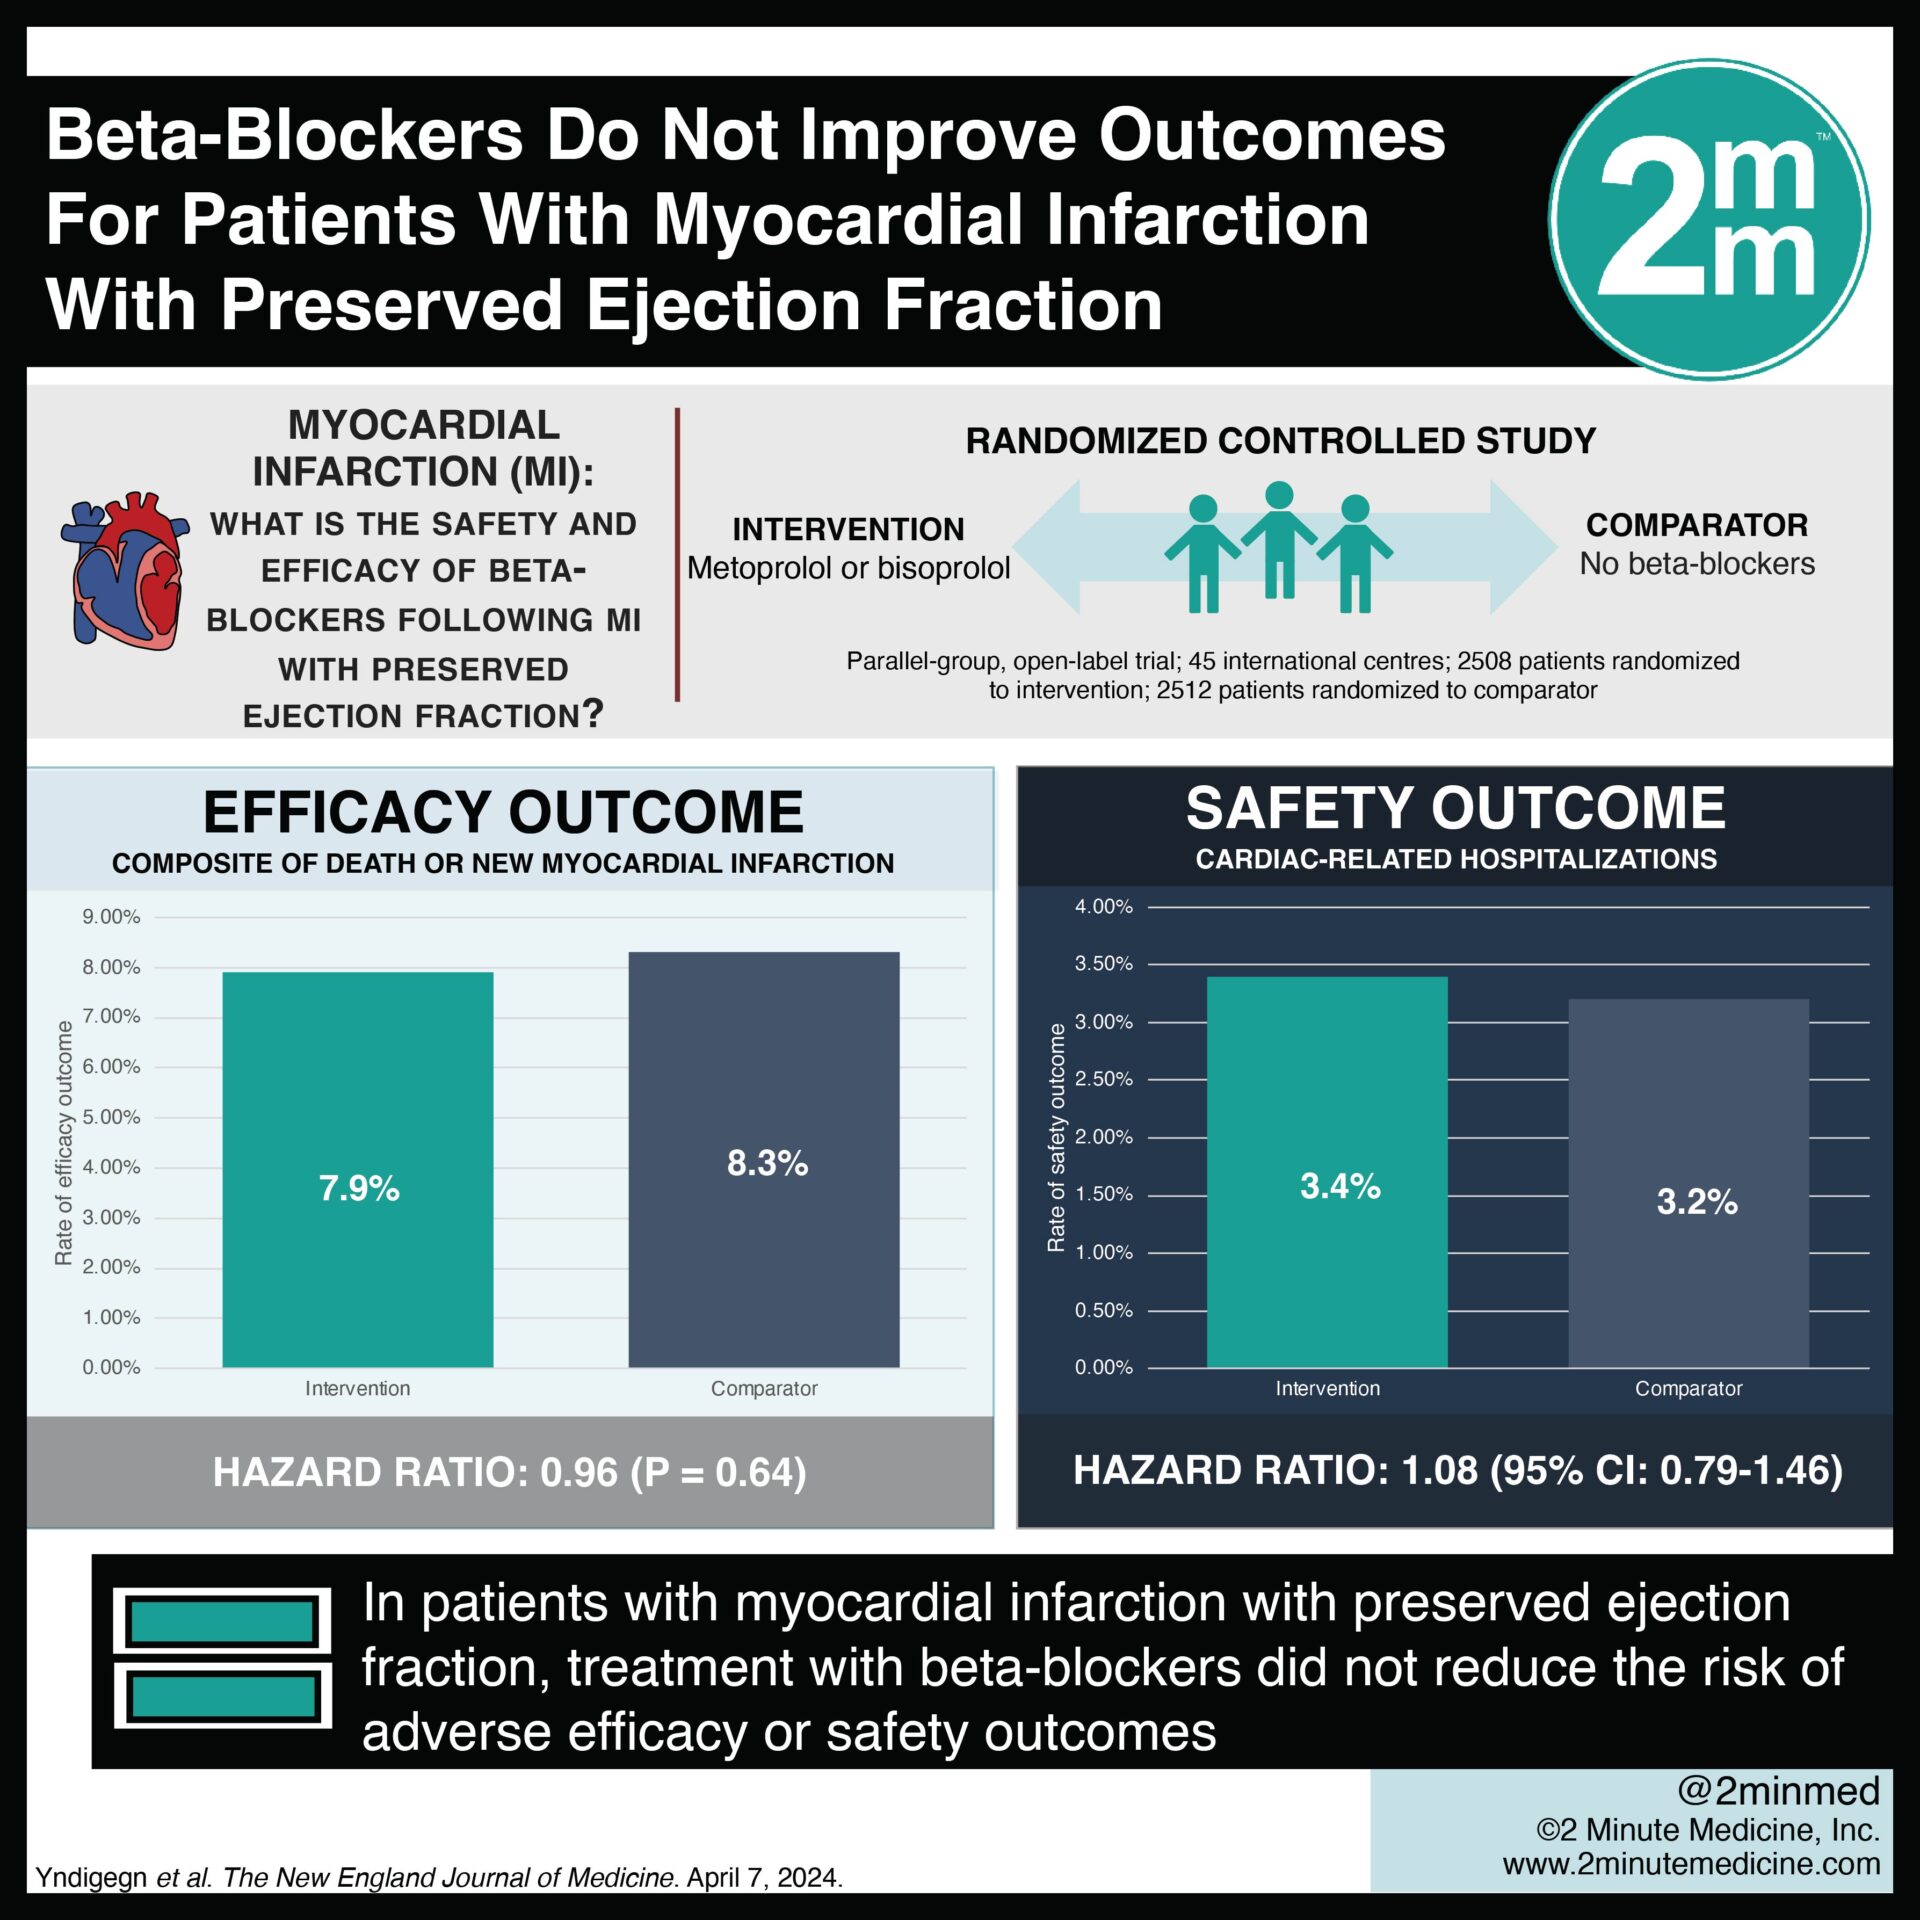 #VisualAbstract: Beta-Blockers after Myocardial Infarction and Preserved Ejection Fraction